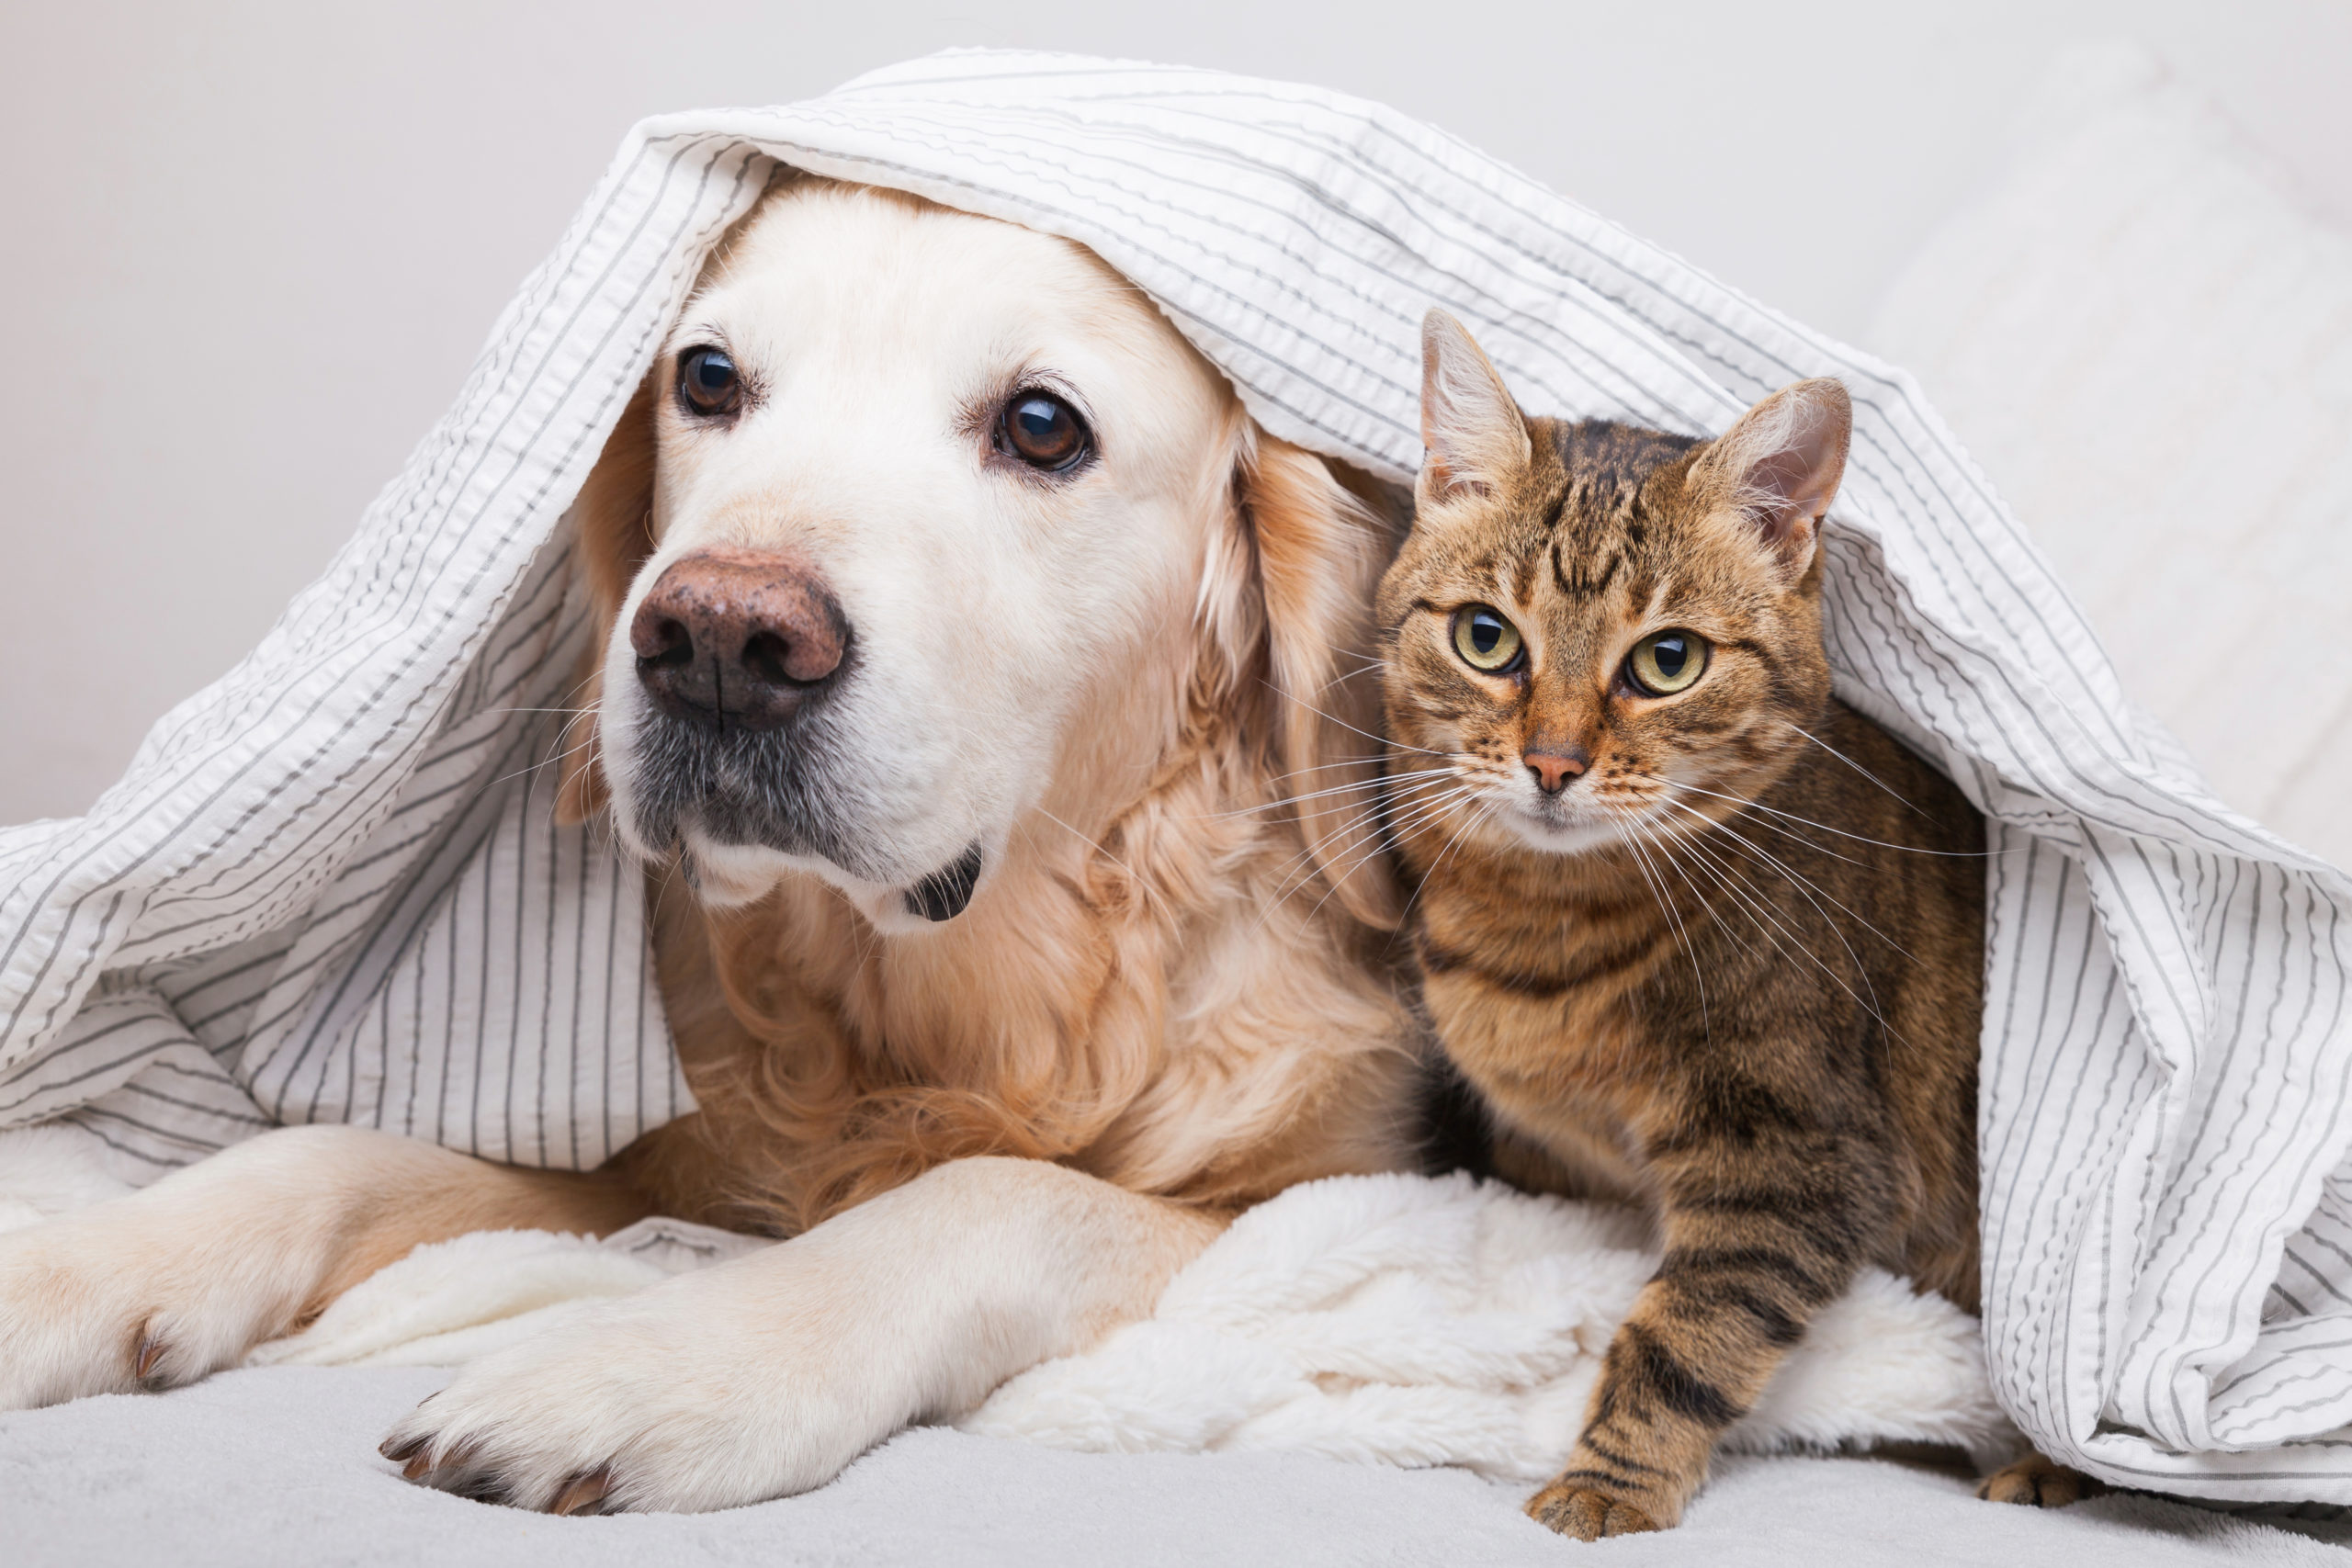 Major Household Dangers for Cats and Dogs